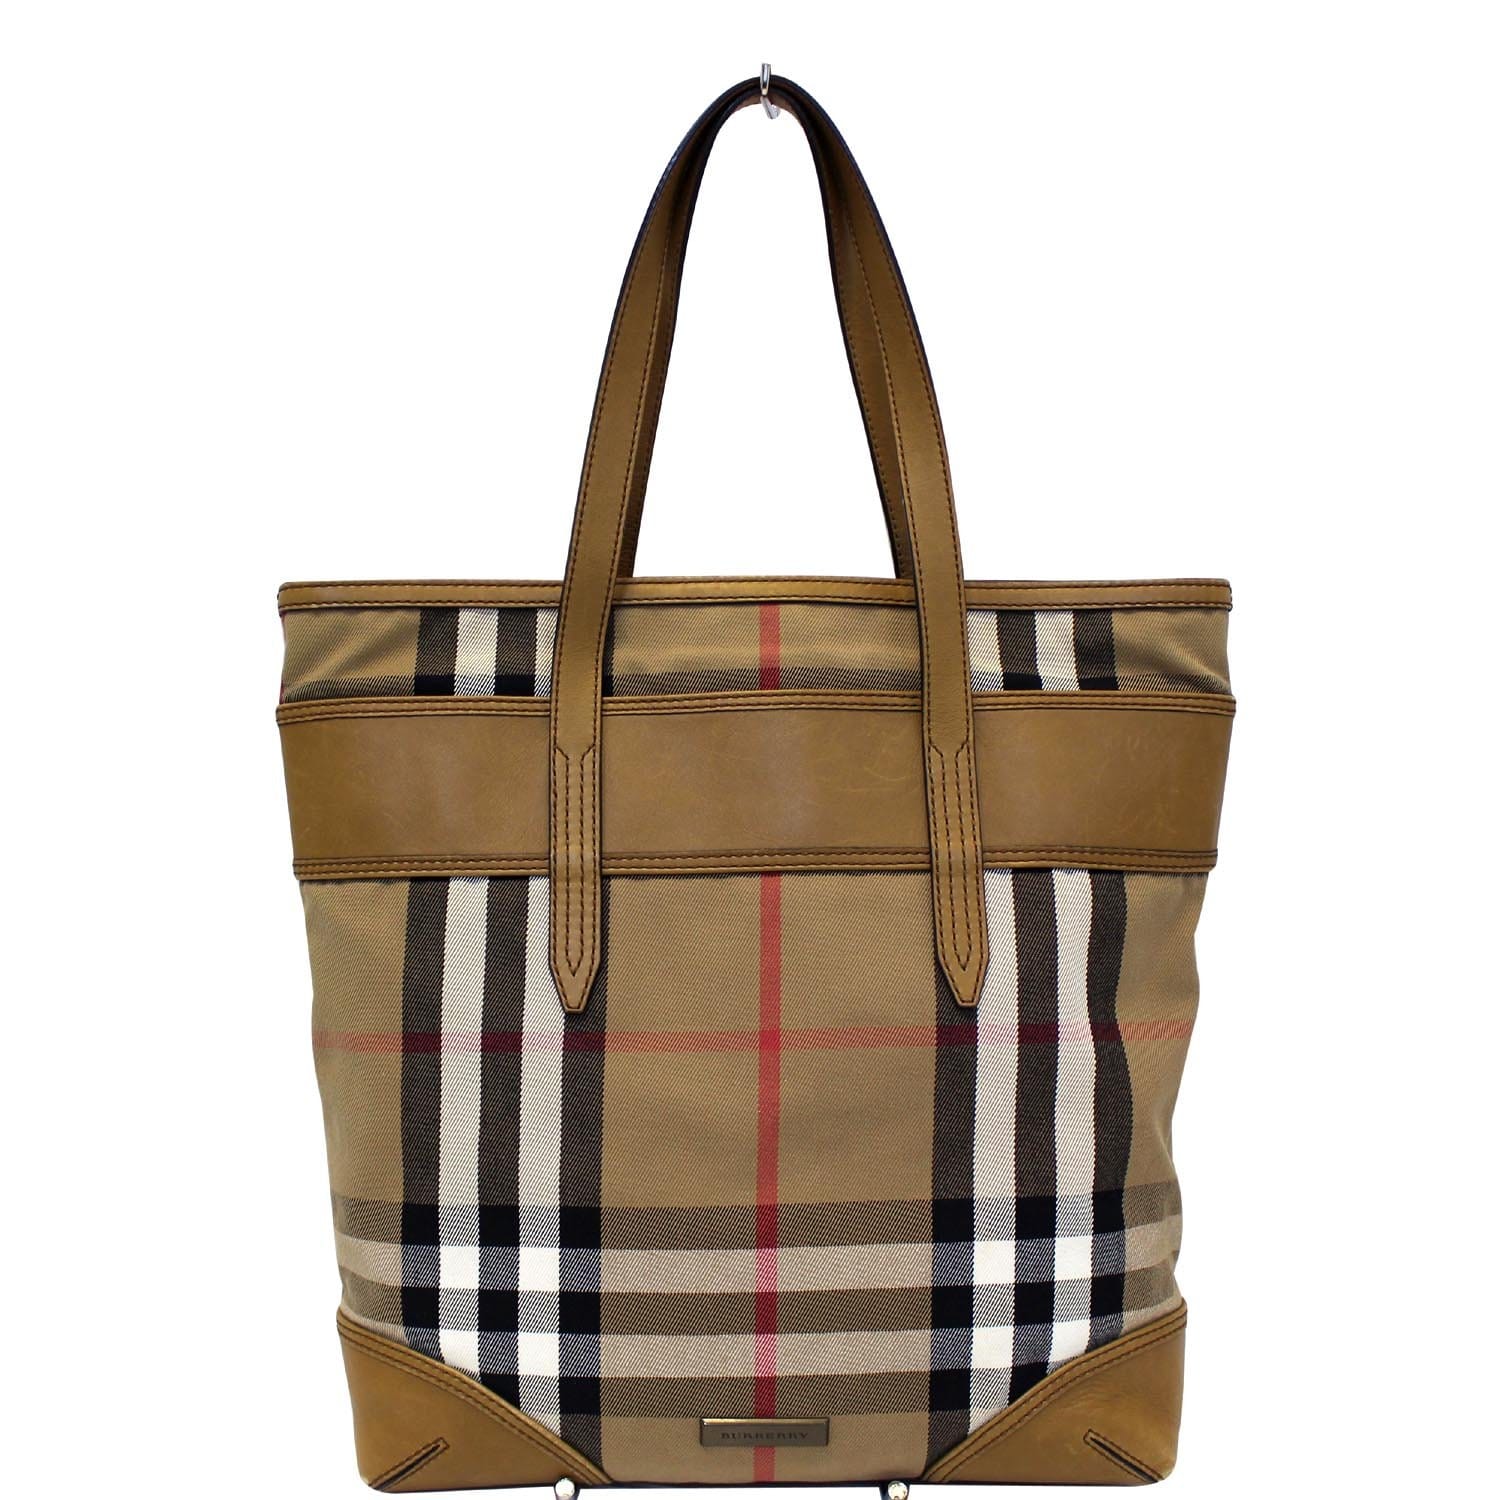 Burberry, Bags, Vintage Burberry Tote